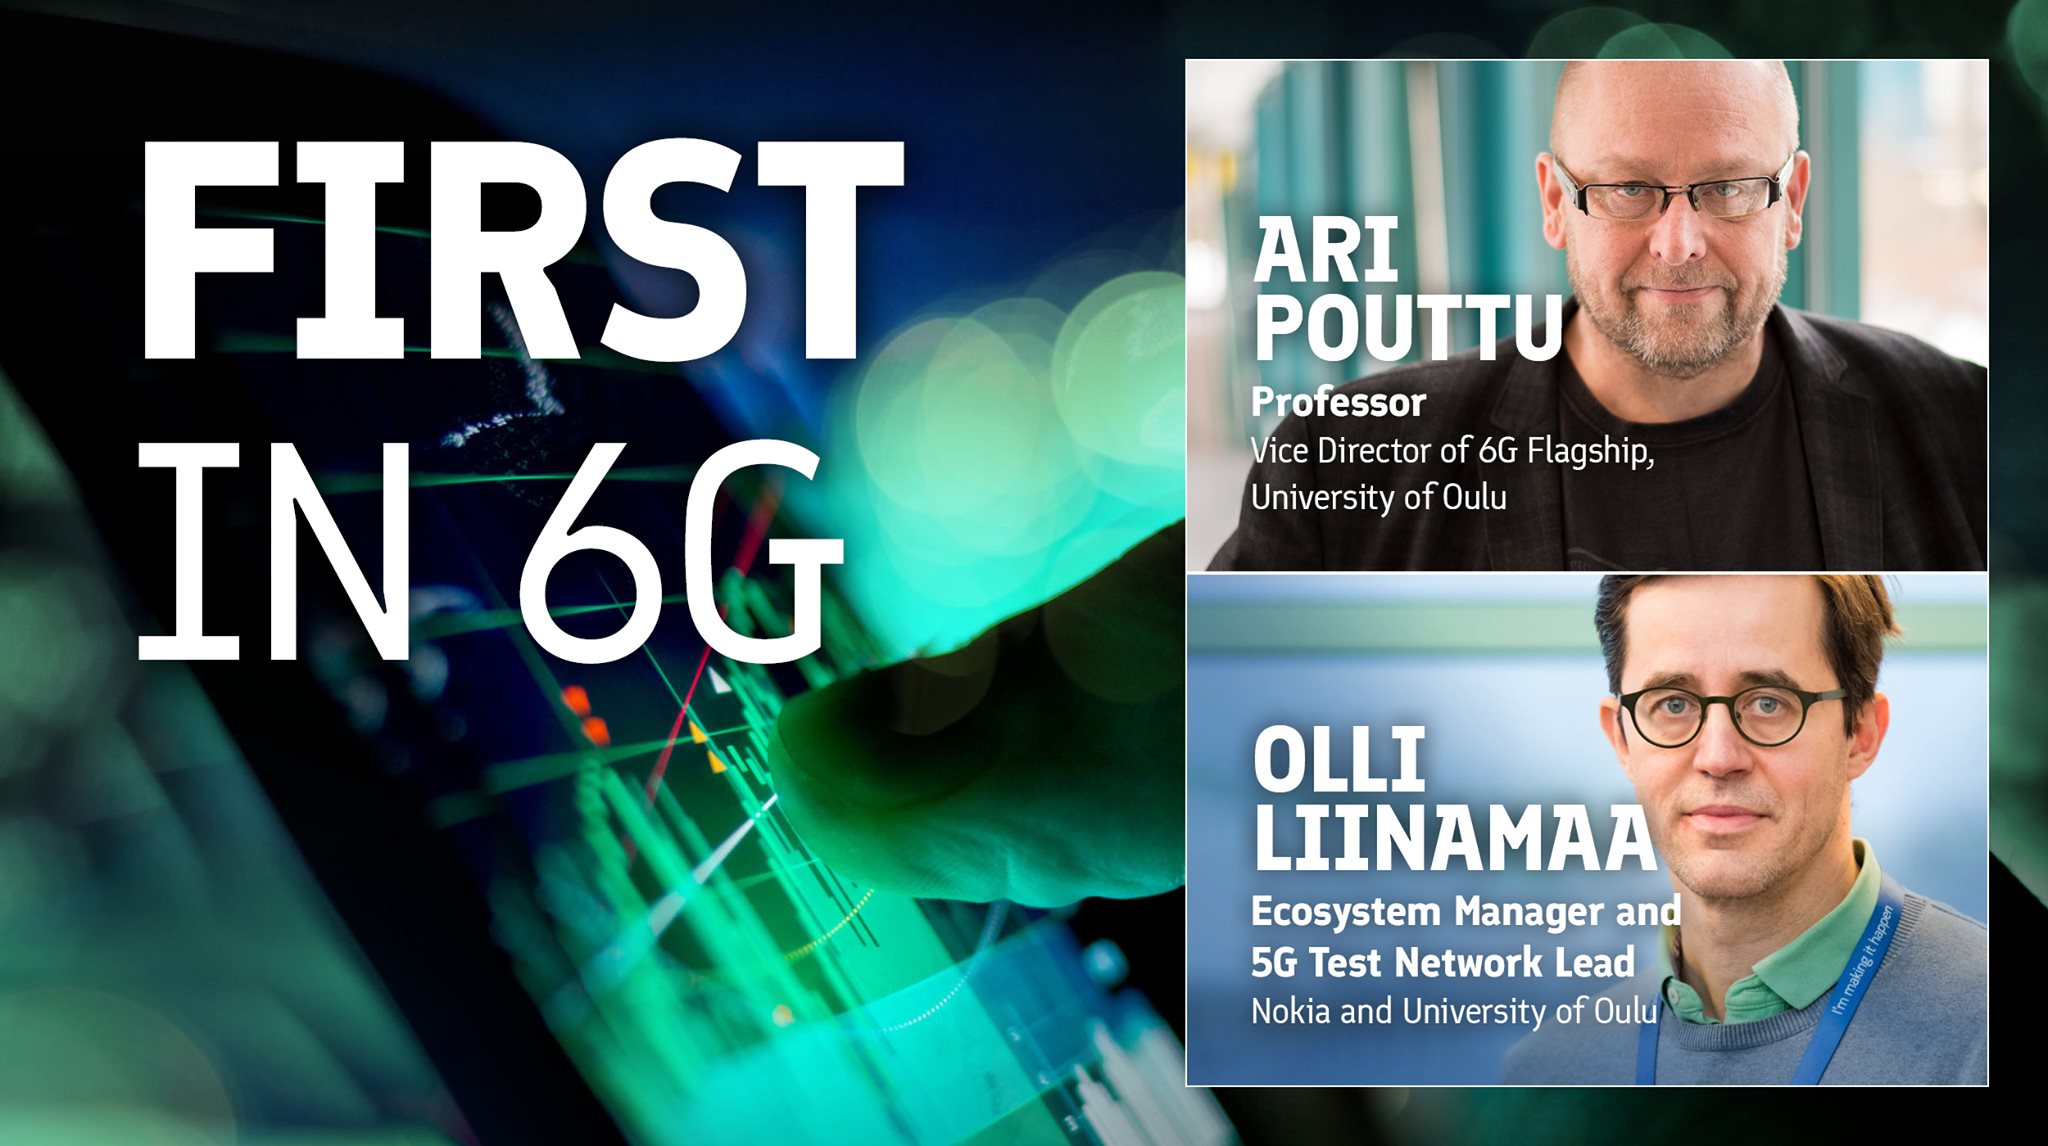 Hear what Finland has developed in the "Future is made in Finland - First 6G"